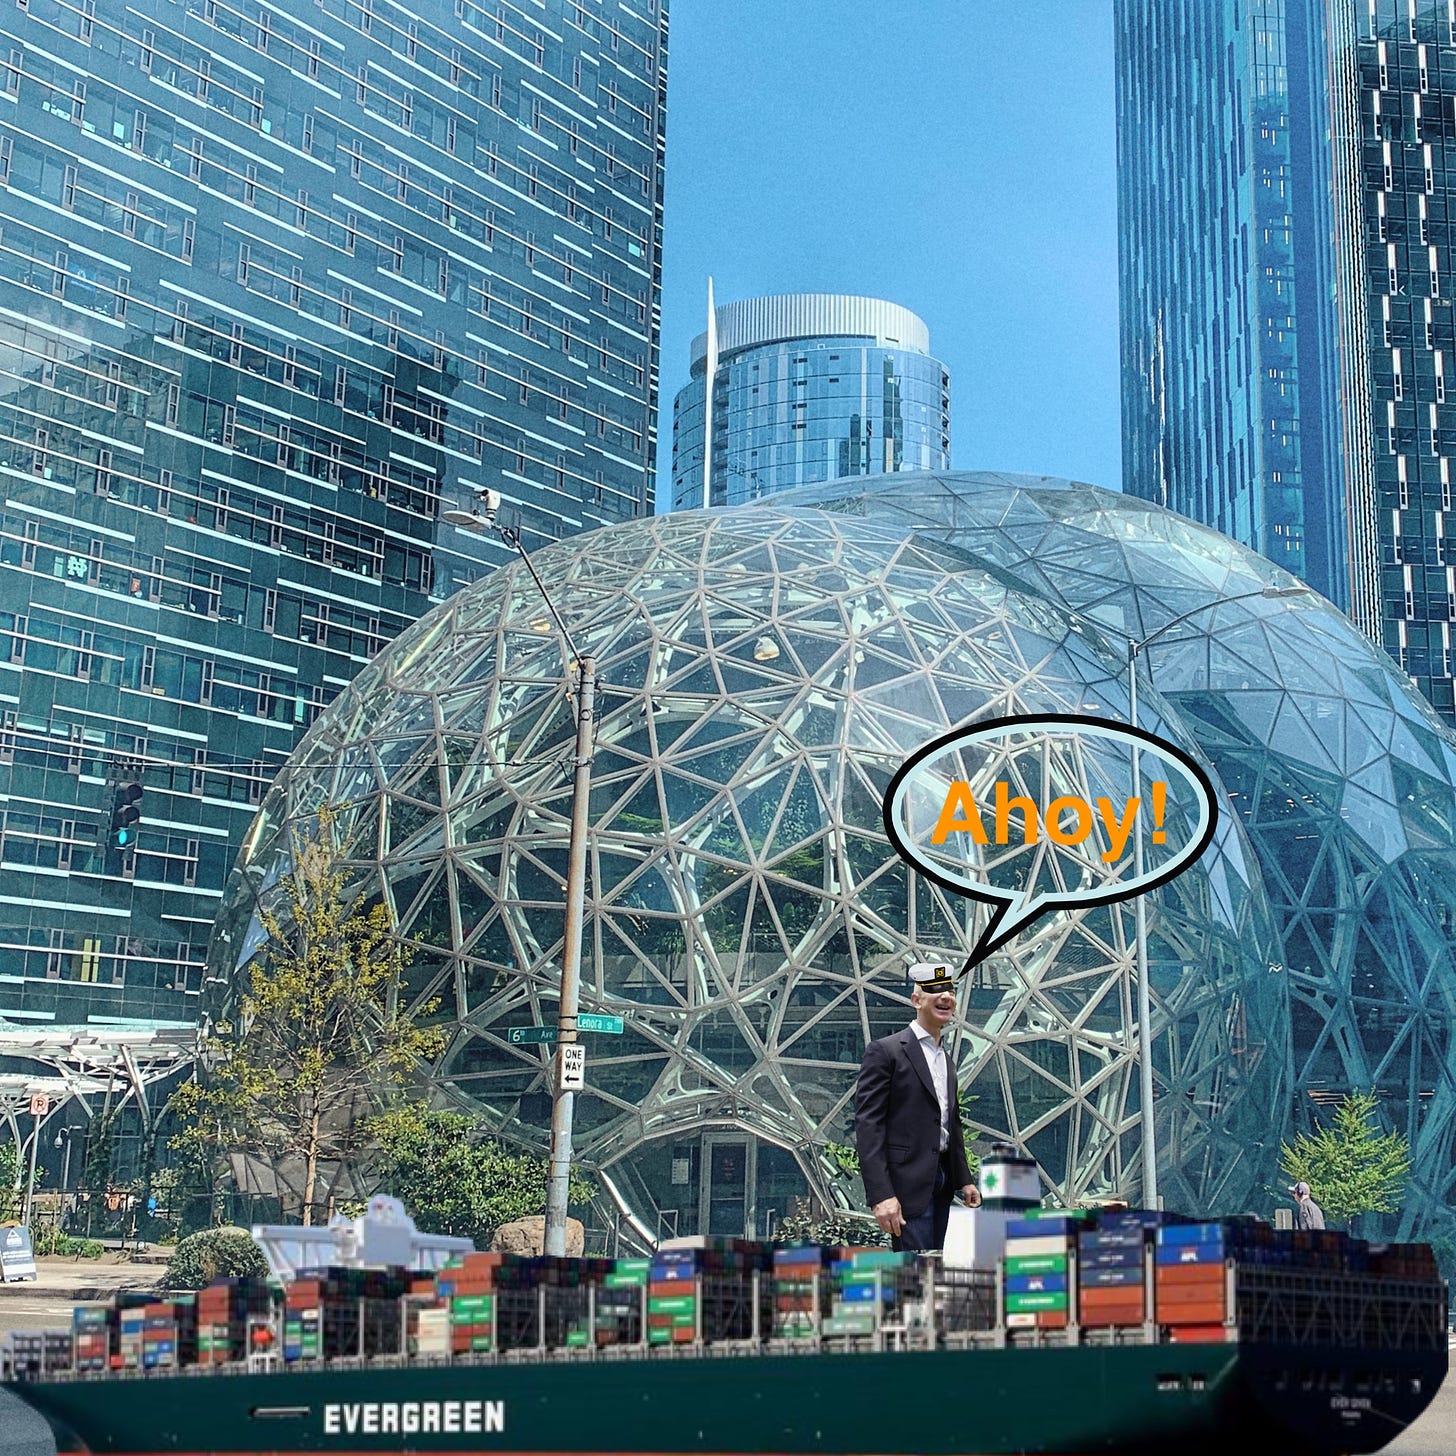 Meme of Jeff Bezos wearing a captain's hat with a speech bubble that says "Ahoy!" as he rides a cargo ship down the street in front of the Bezos Balls, a giant round glass terrarium in downtown Seattle